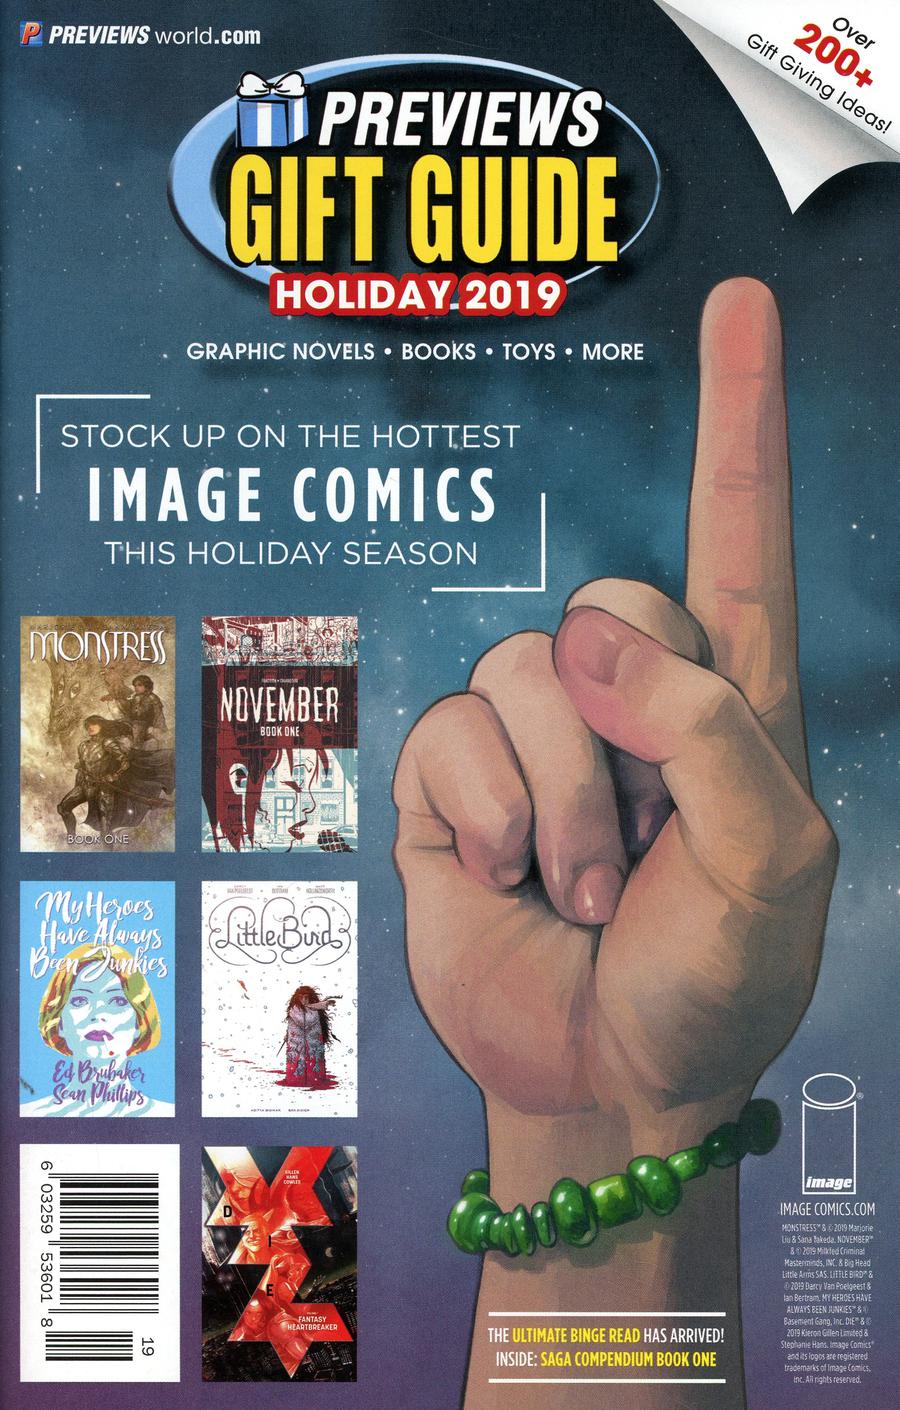 Previews Holiday Gift Guide 2019